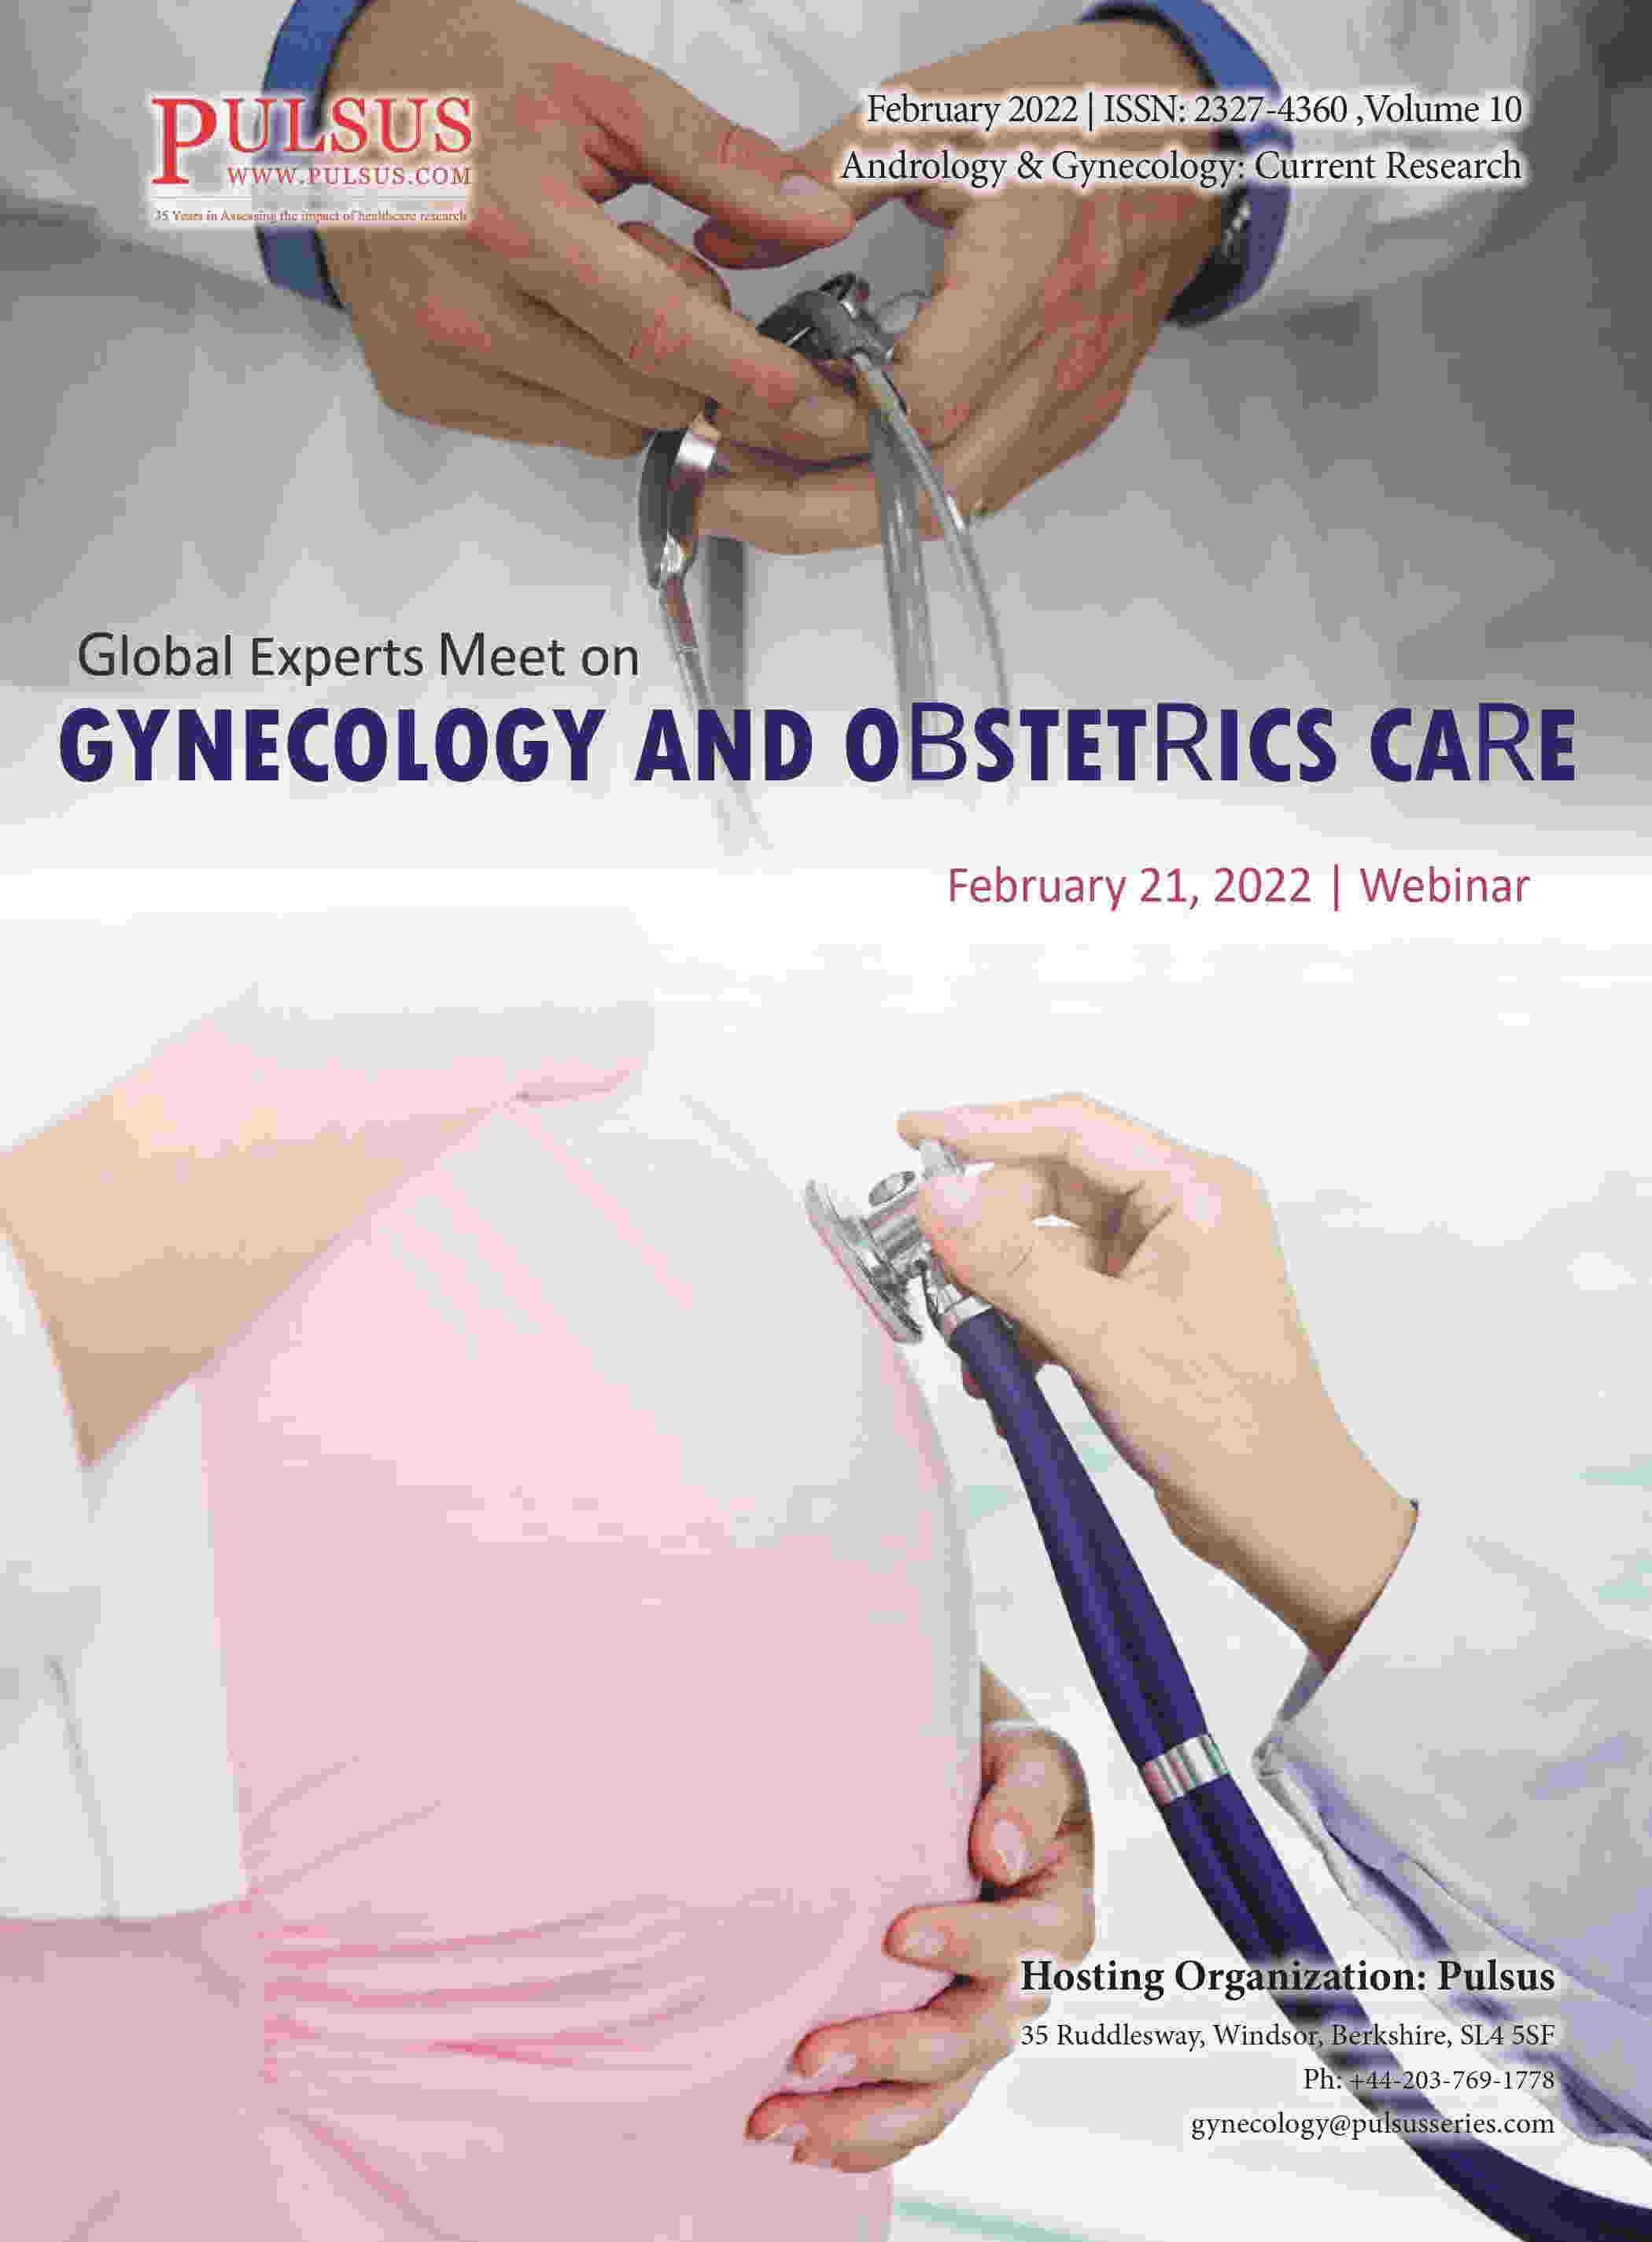 https://www.scitechnol.com/conference-abstracts/world-gynecology-2022-proceedings.html